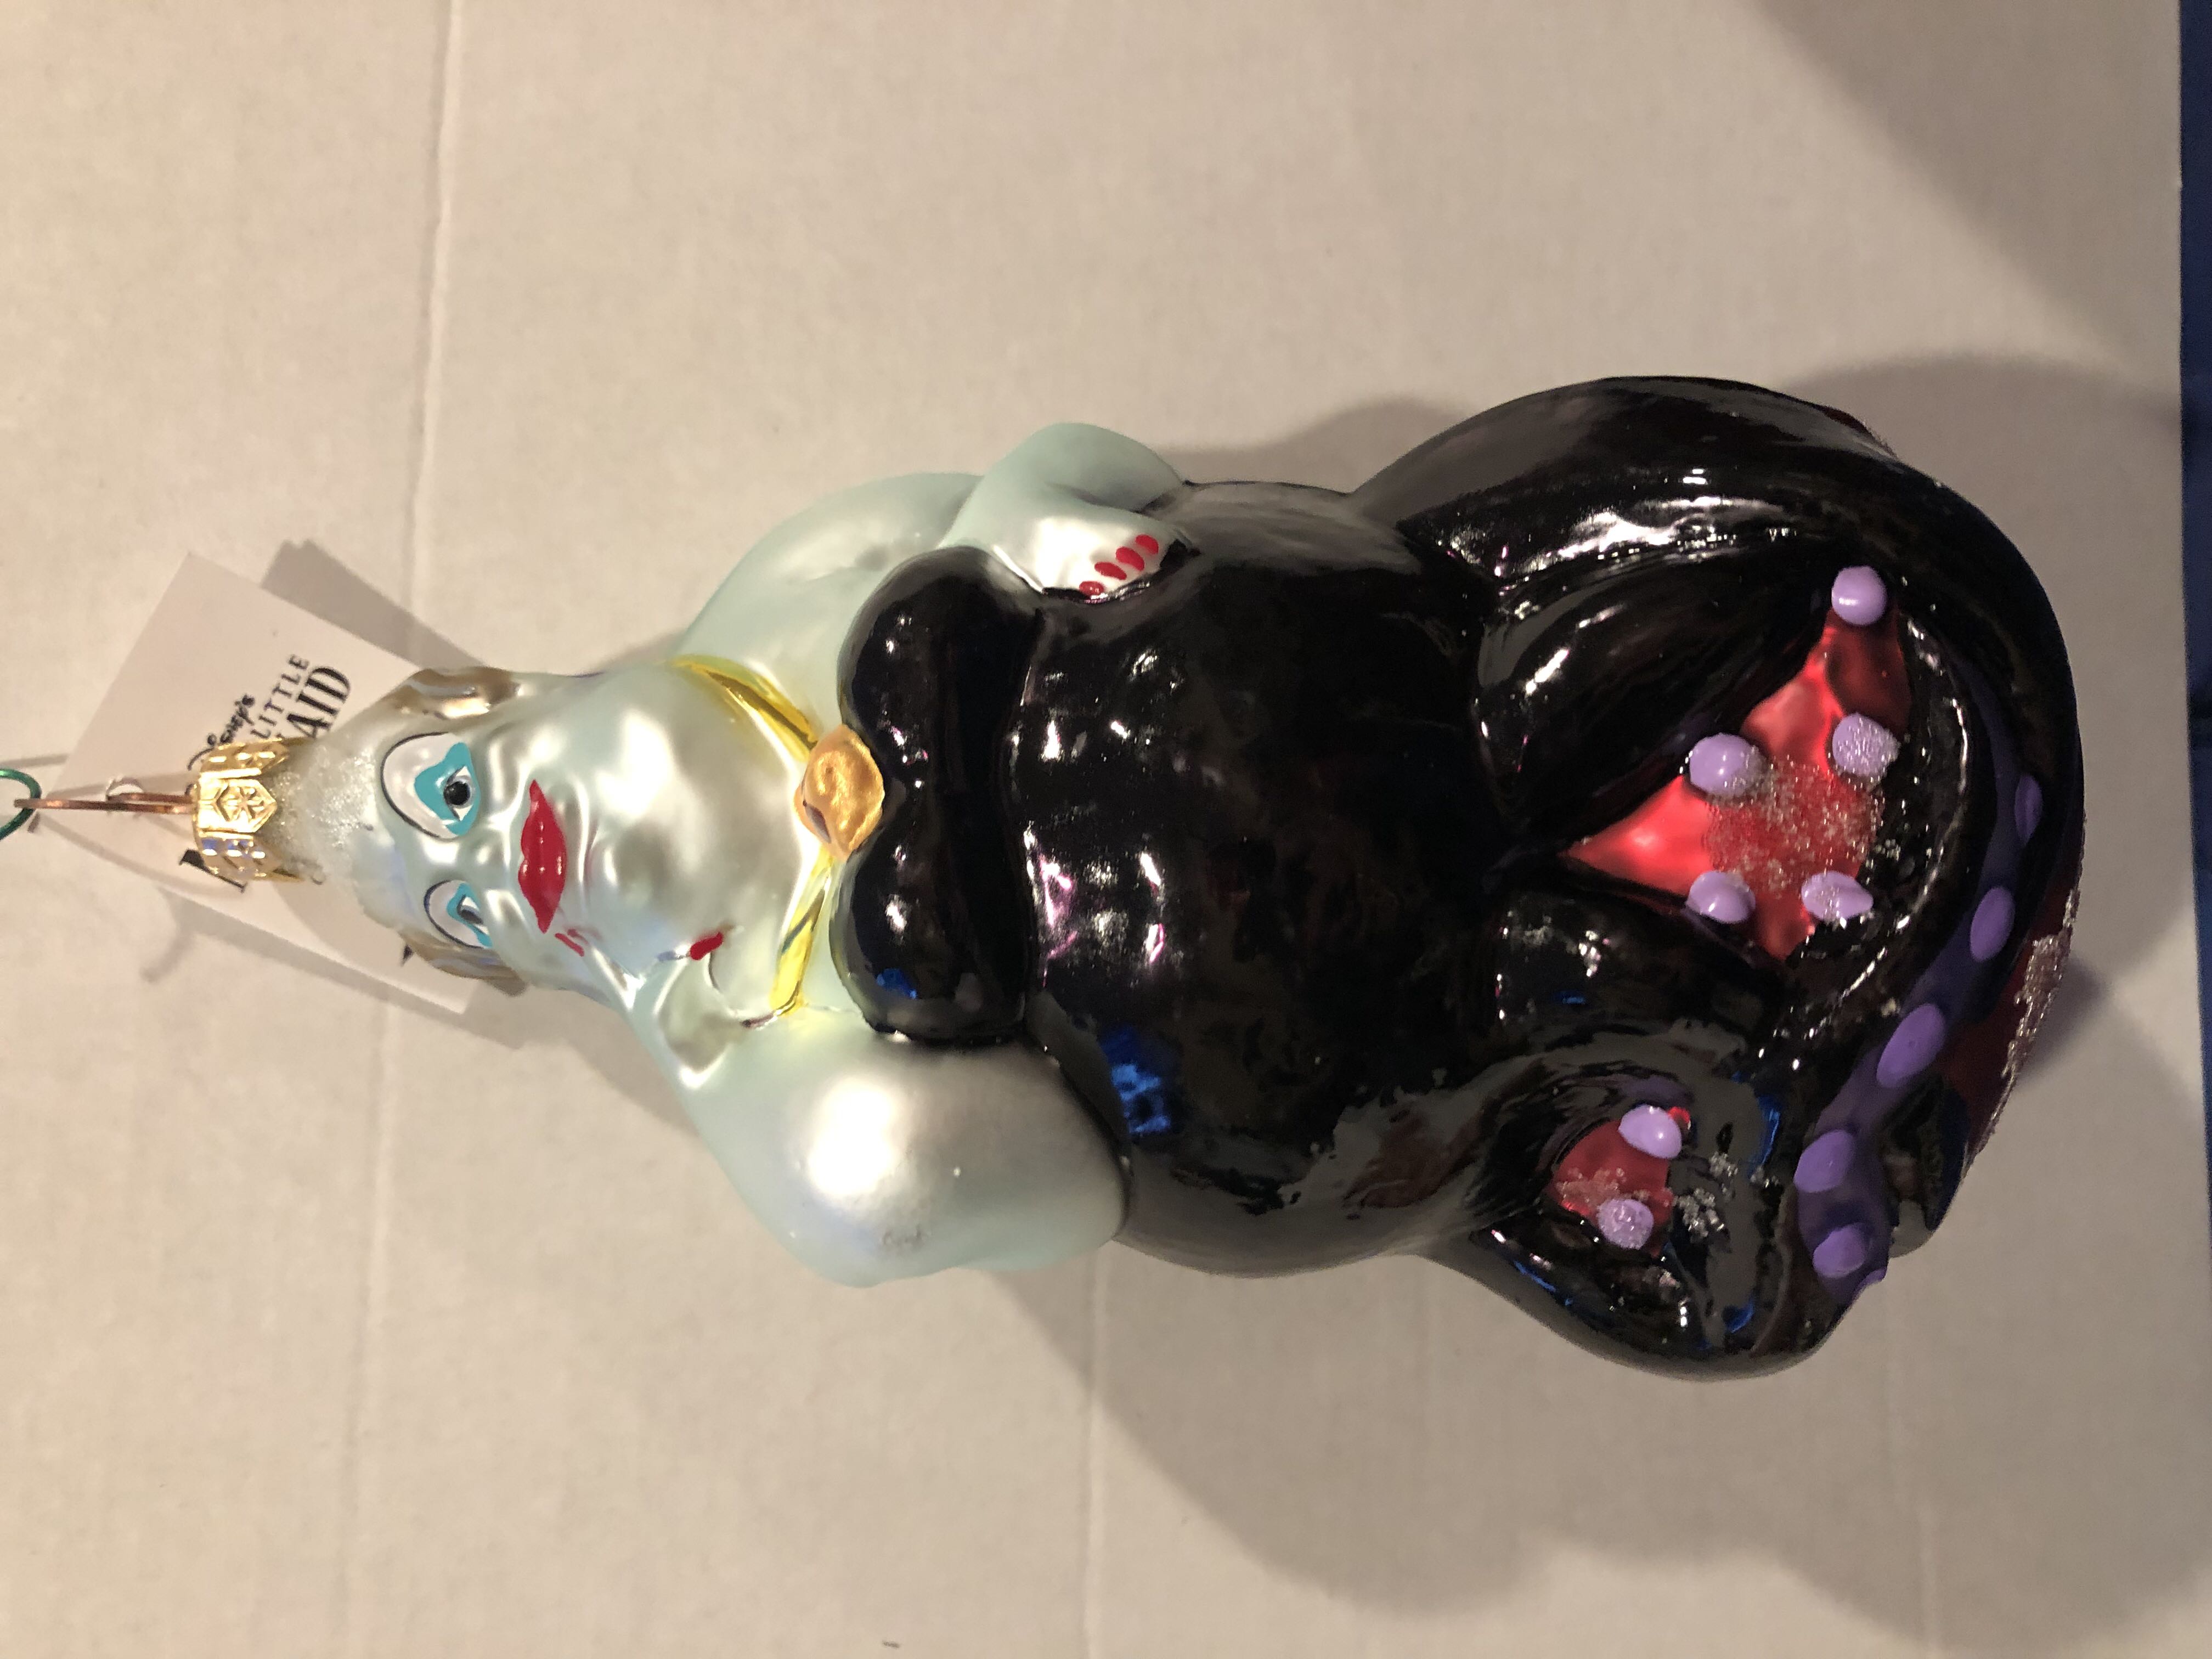 Ursula - the Little Mermaid ornament collectible - Main Image 1